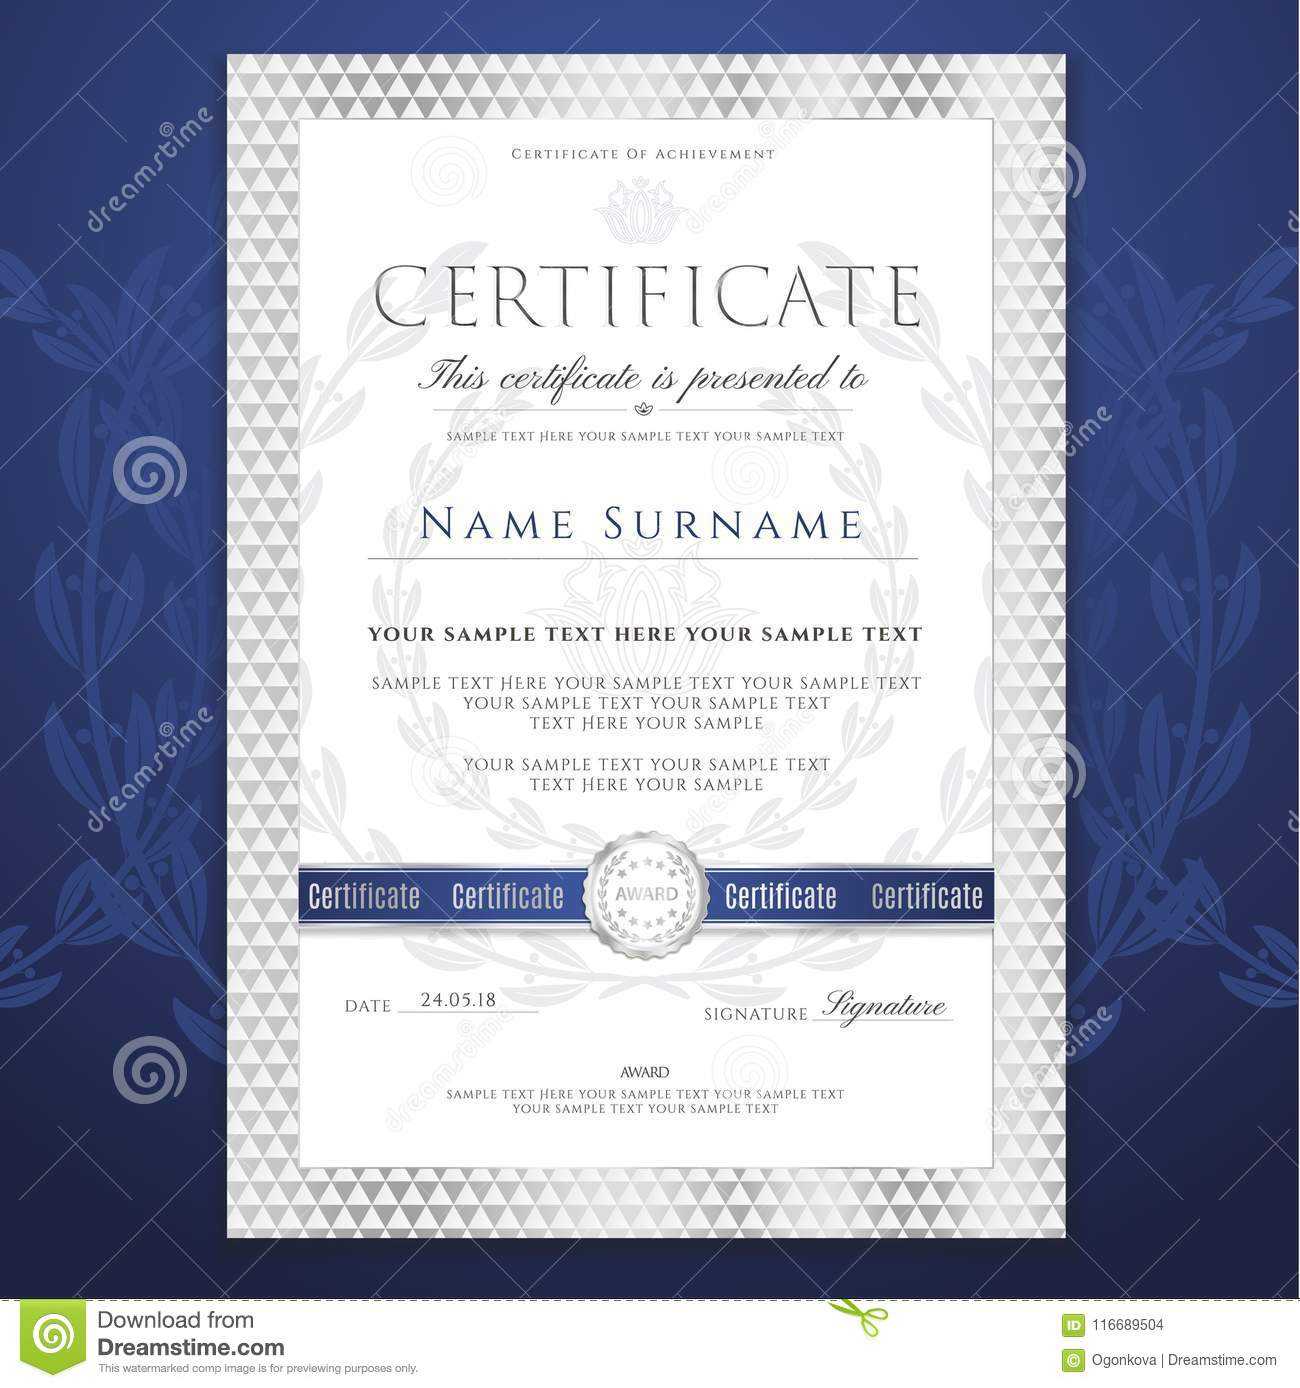 Certificate Template. Printable / Editable Design For With Regard To Free Printable Graduation Certificate Templates